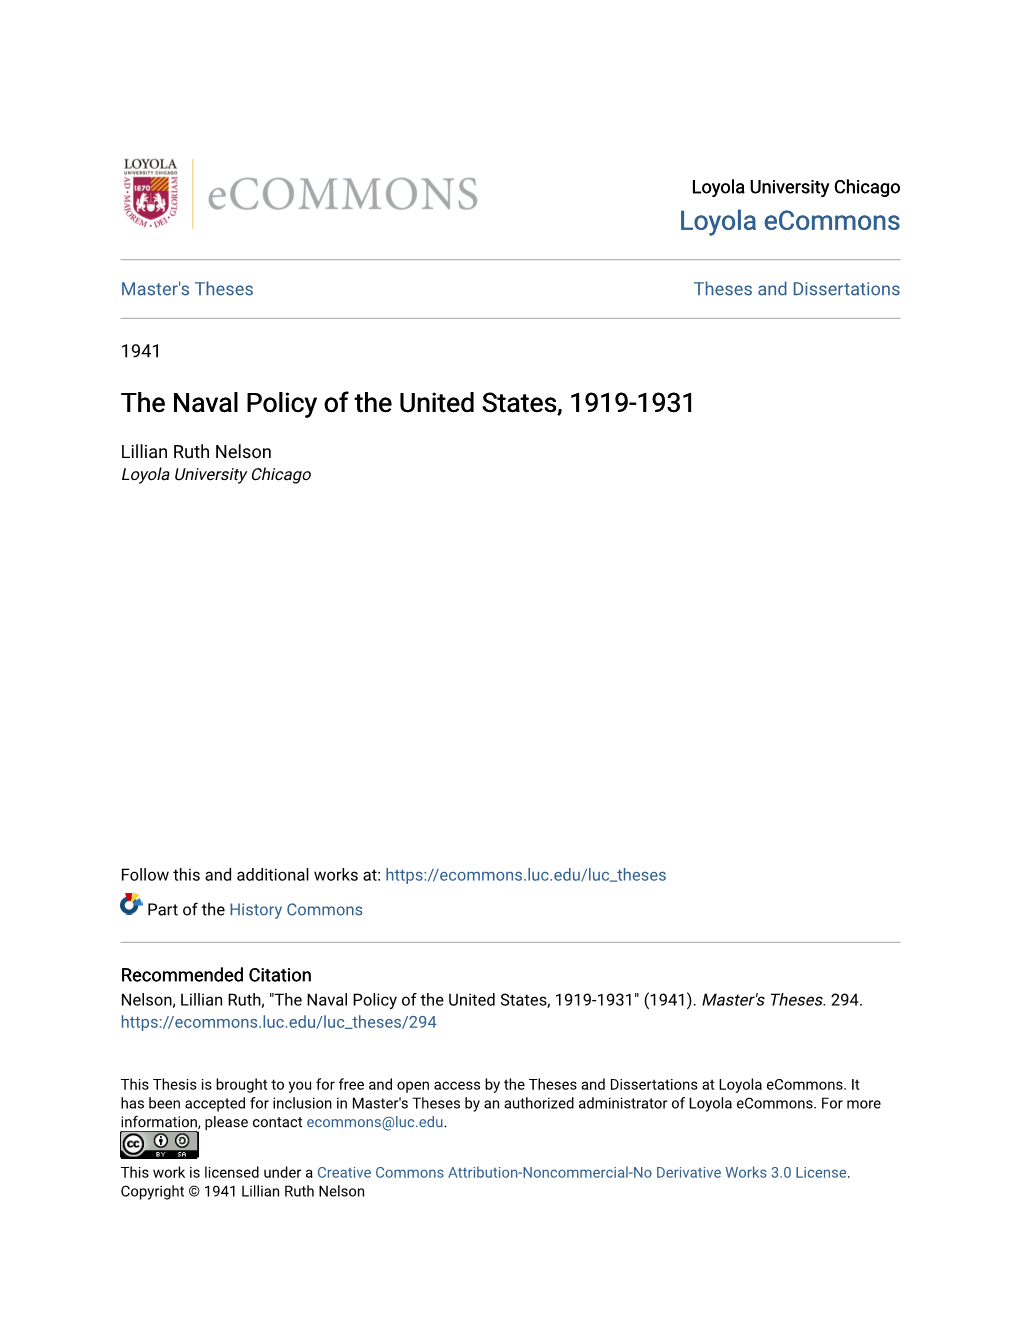 The Naval Policy of the United States, 1919-1931